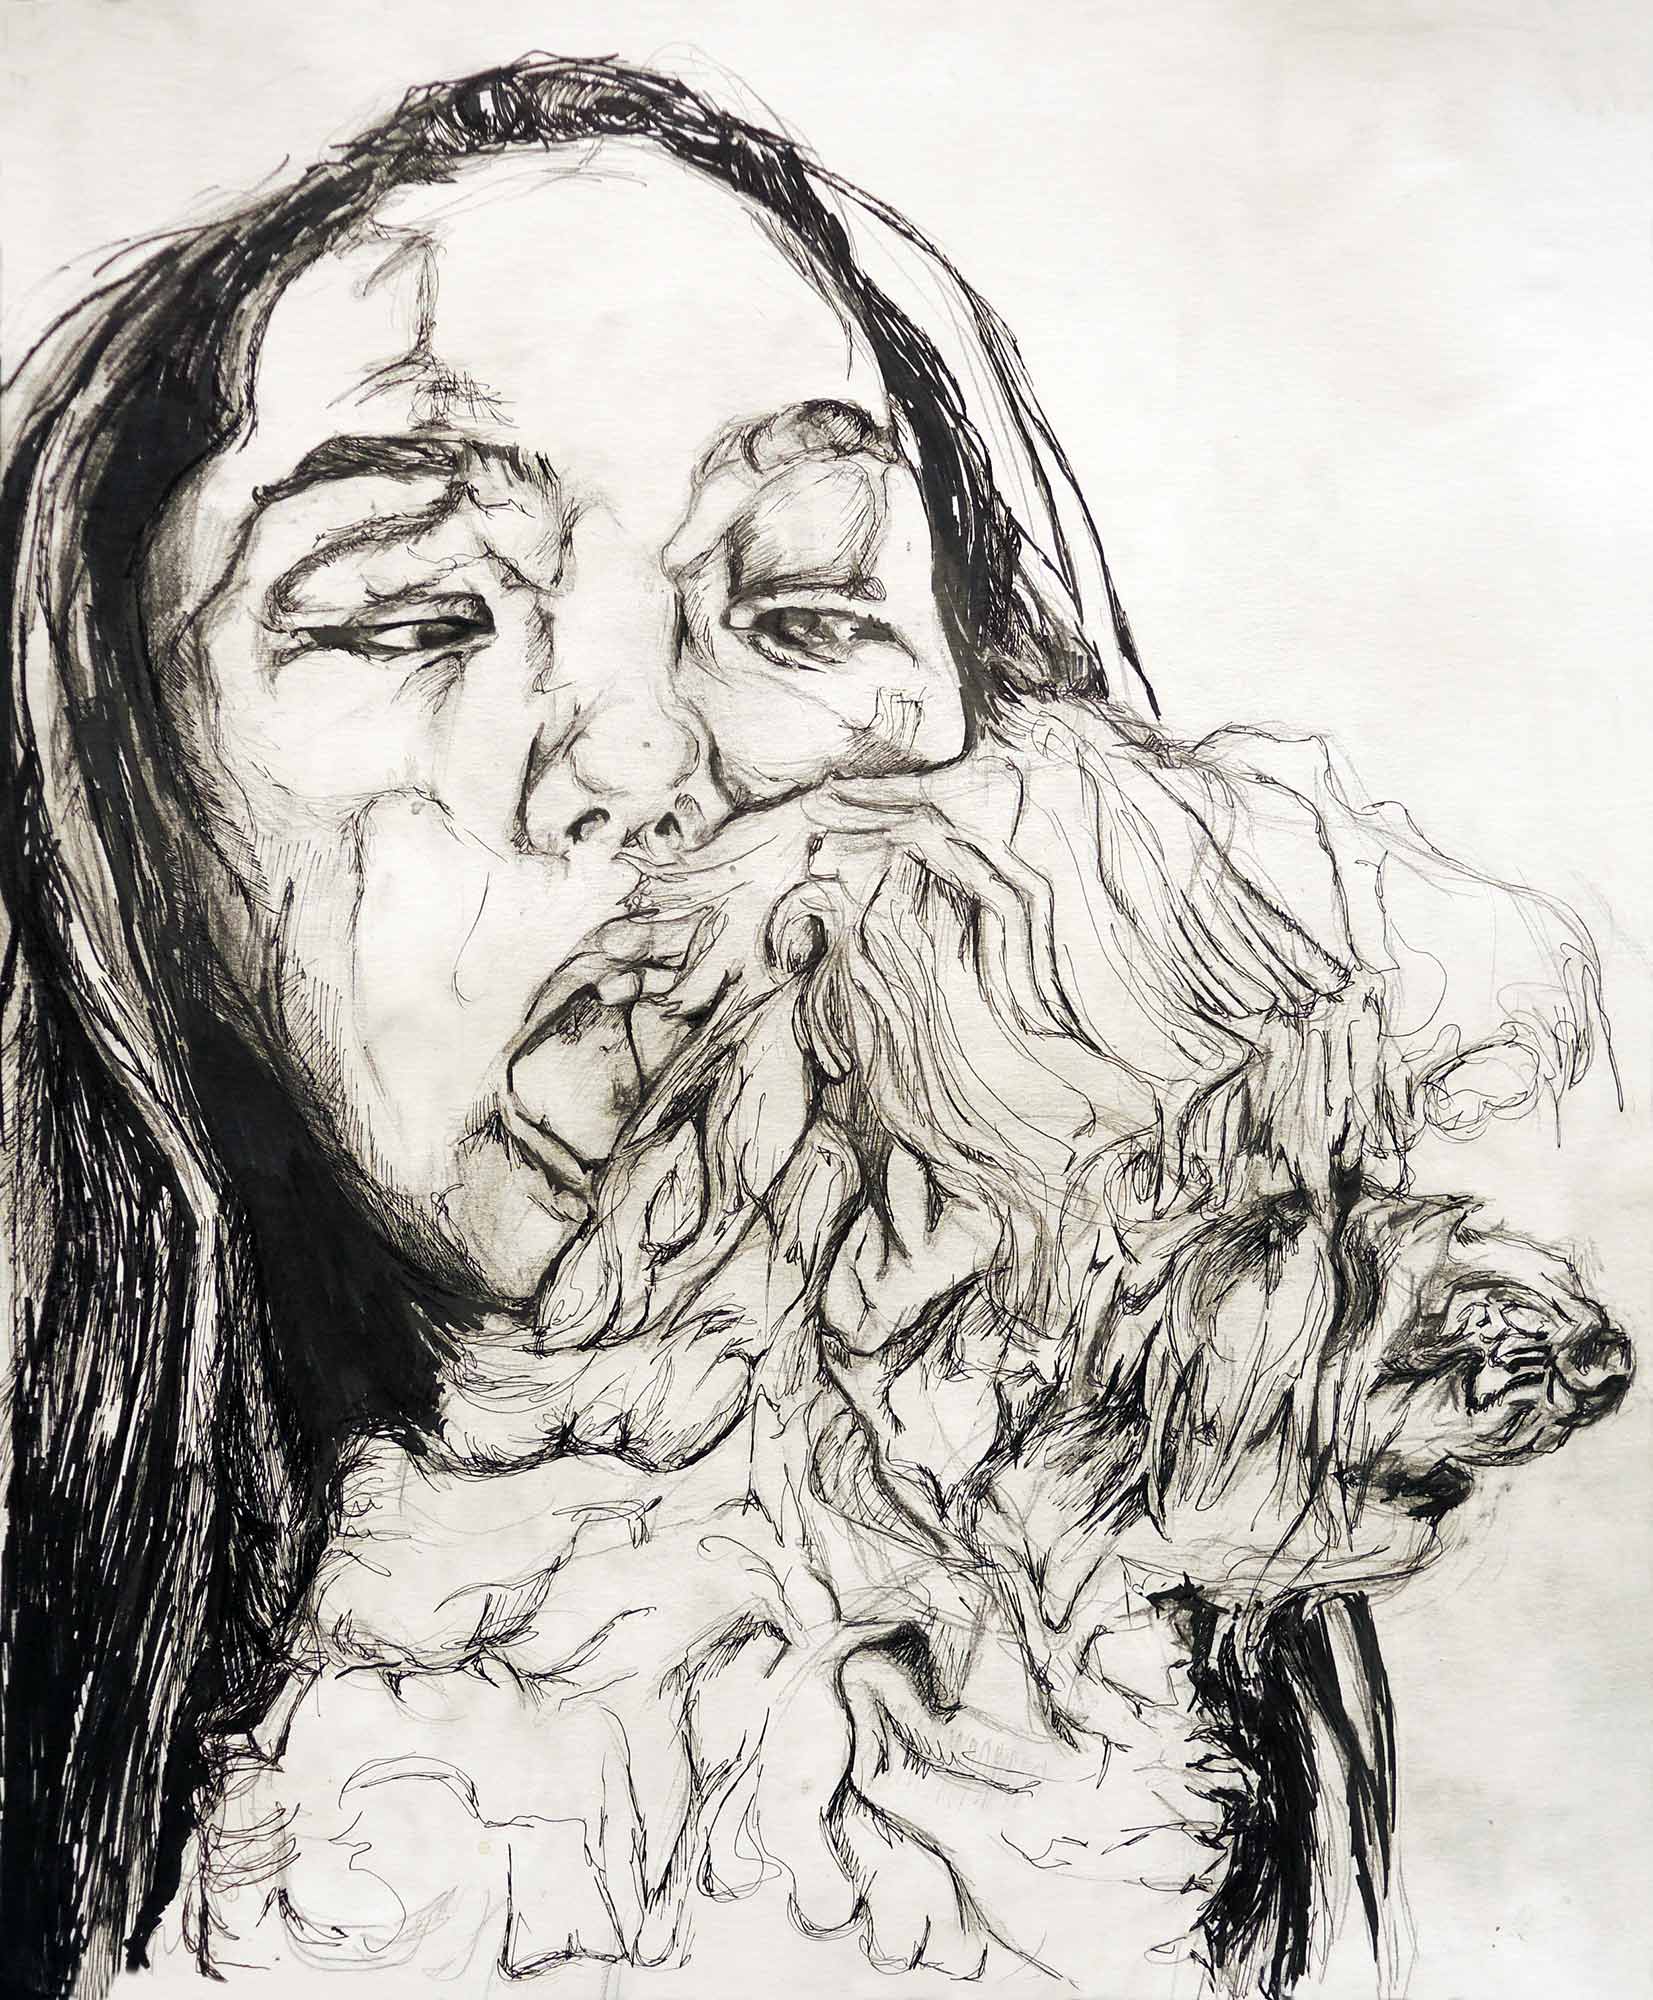 An illustration of a young woman and dog